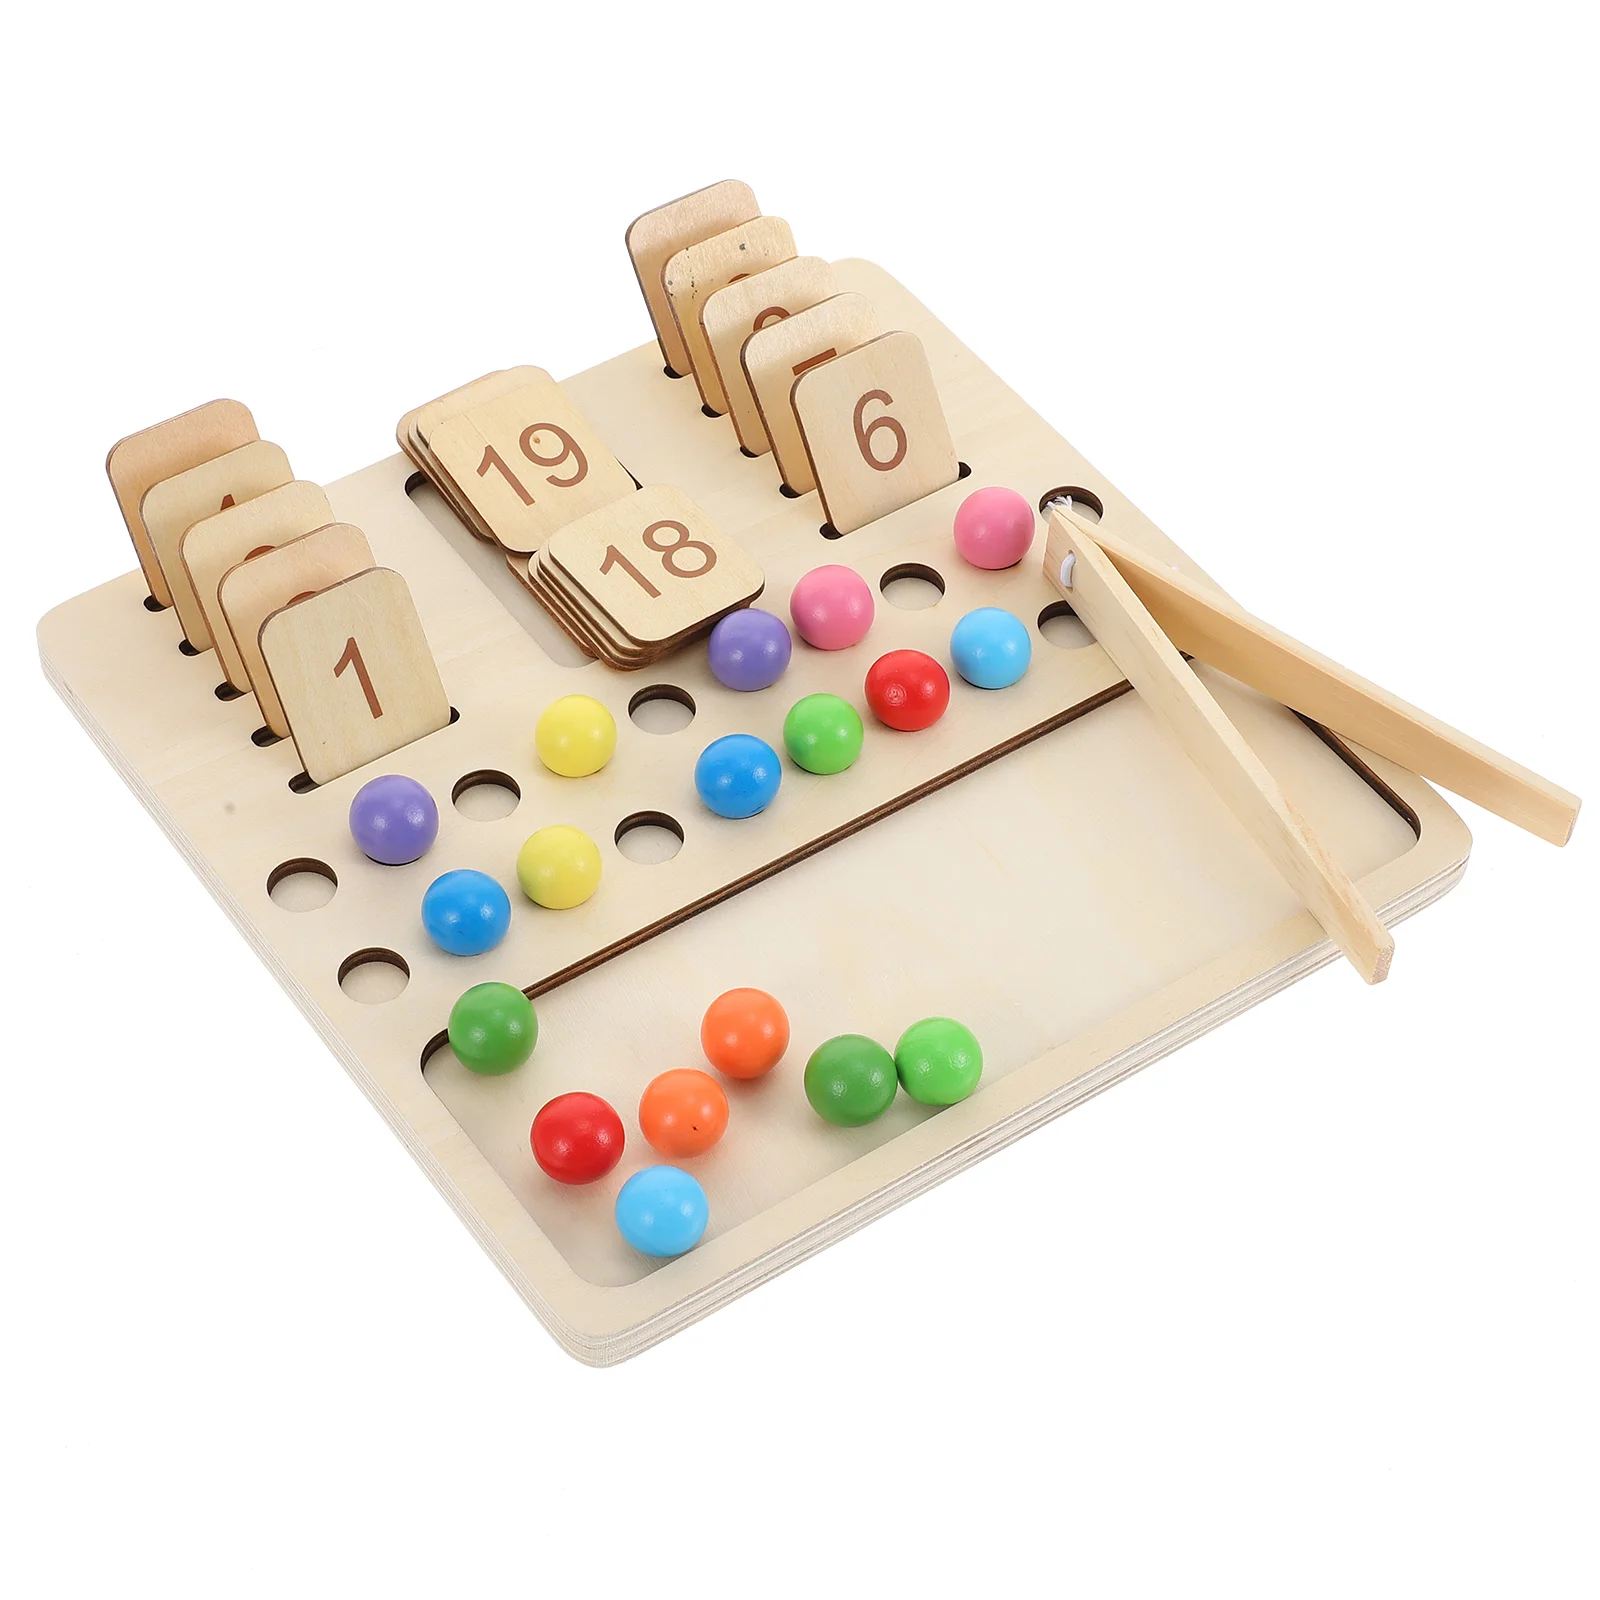 Digital Cognitive Board Toys Wooden Educational Teaching Supplies Playthings Aids Arithmetic Boards Math Learning wooden multiplication montessori educational wooden toys math arithmetic table board game for kids early learning gift